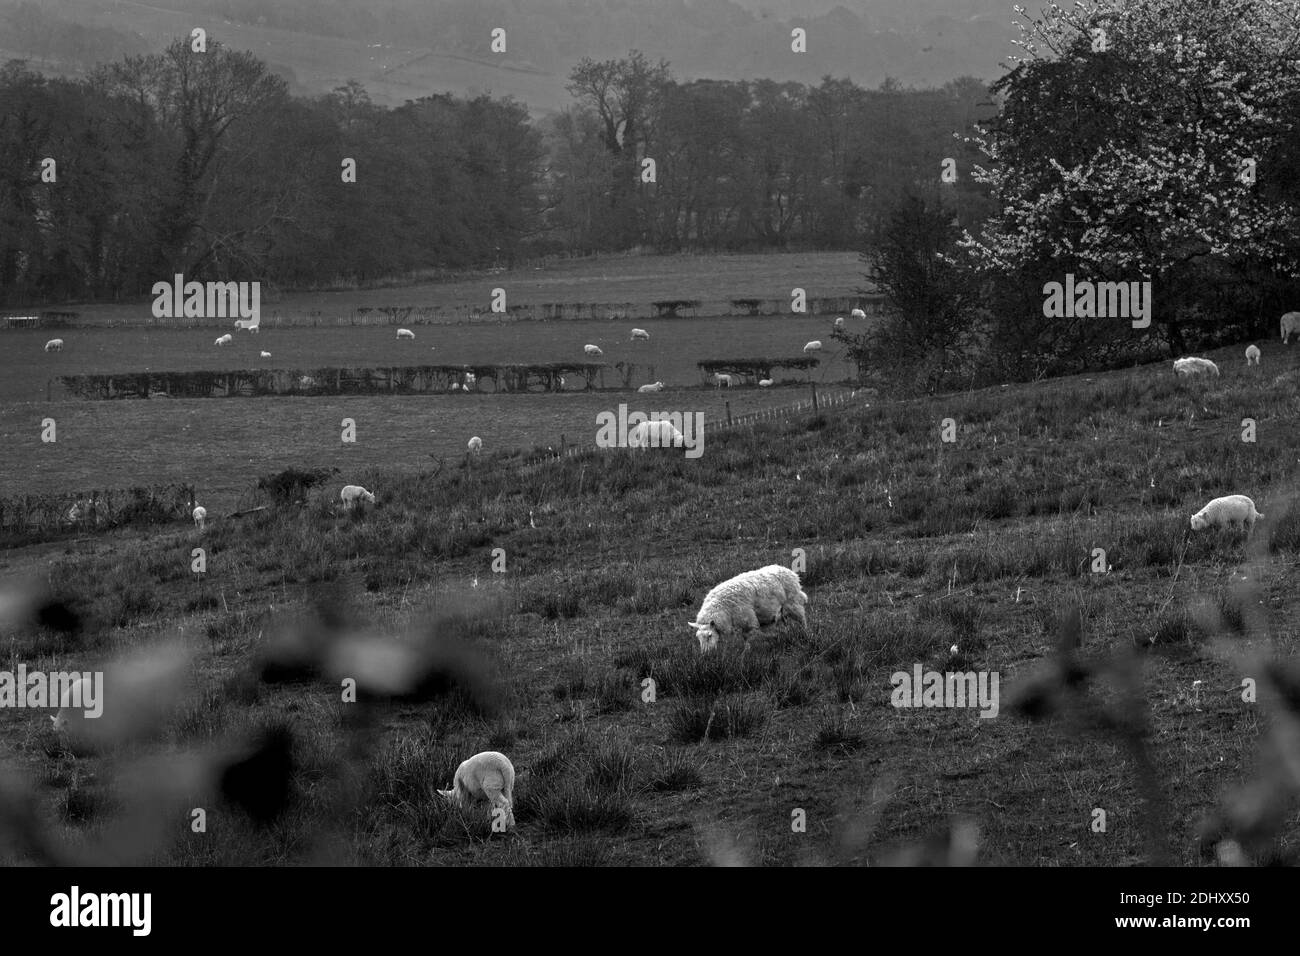 Sheep graze on pasture at Black Mountains area of the Brecon Beacons National Park in Monmouthshire, south east Wales Stock Photo